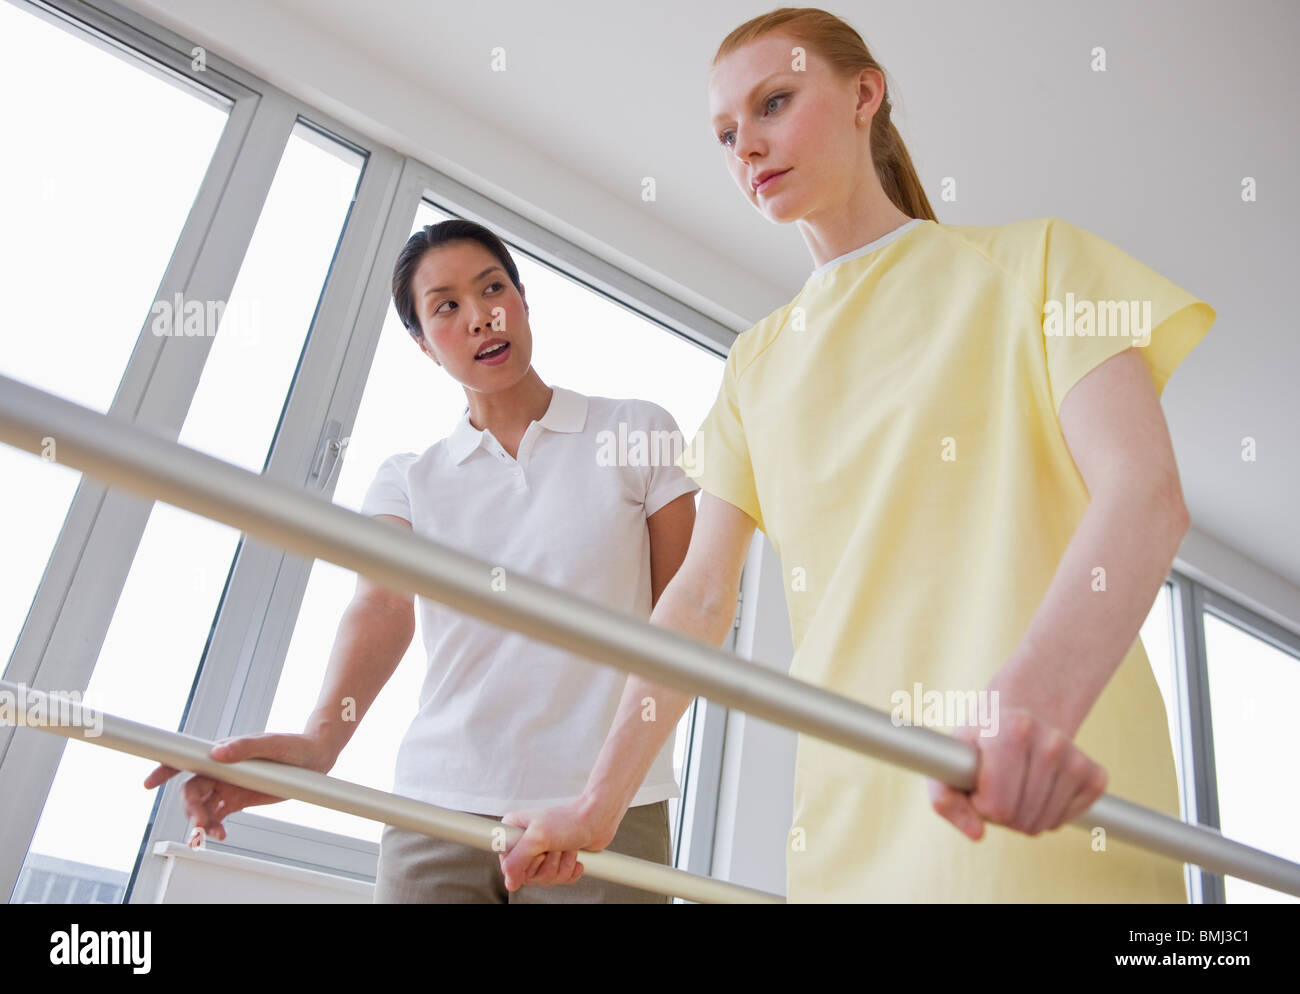 Patient doing physical therapy Stock Photo